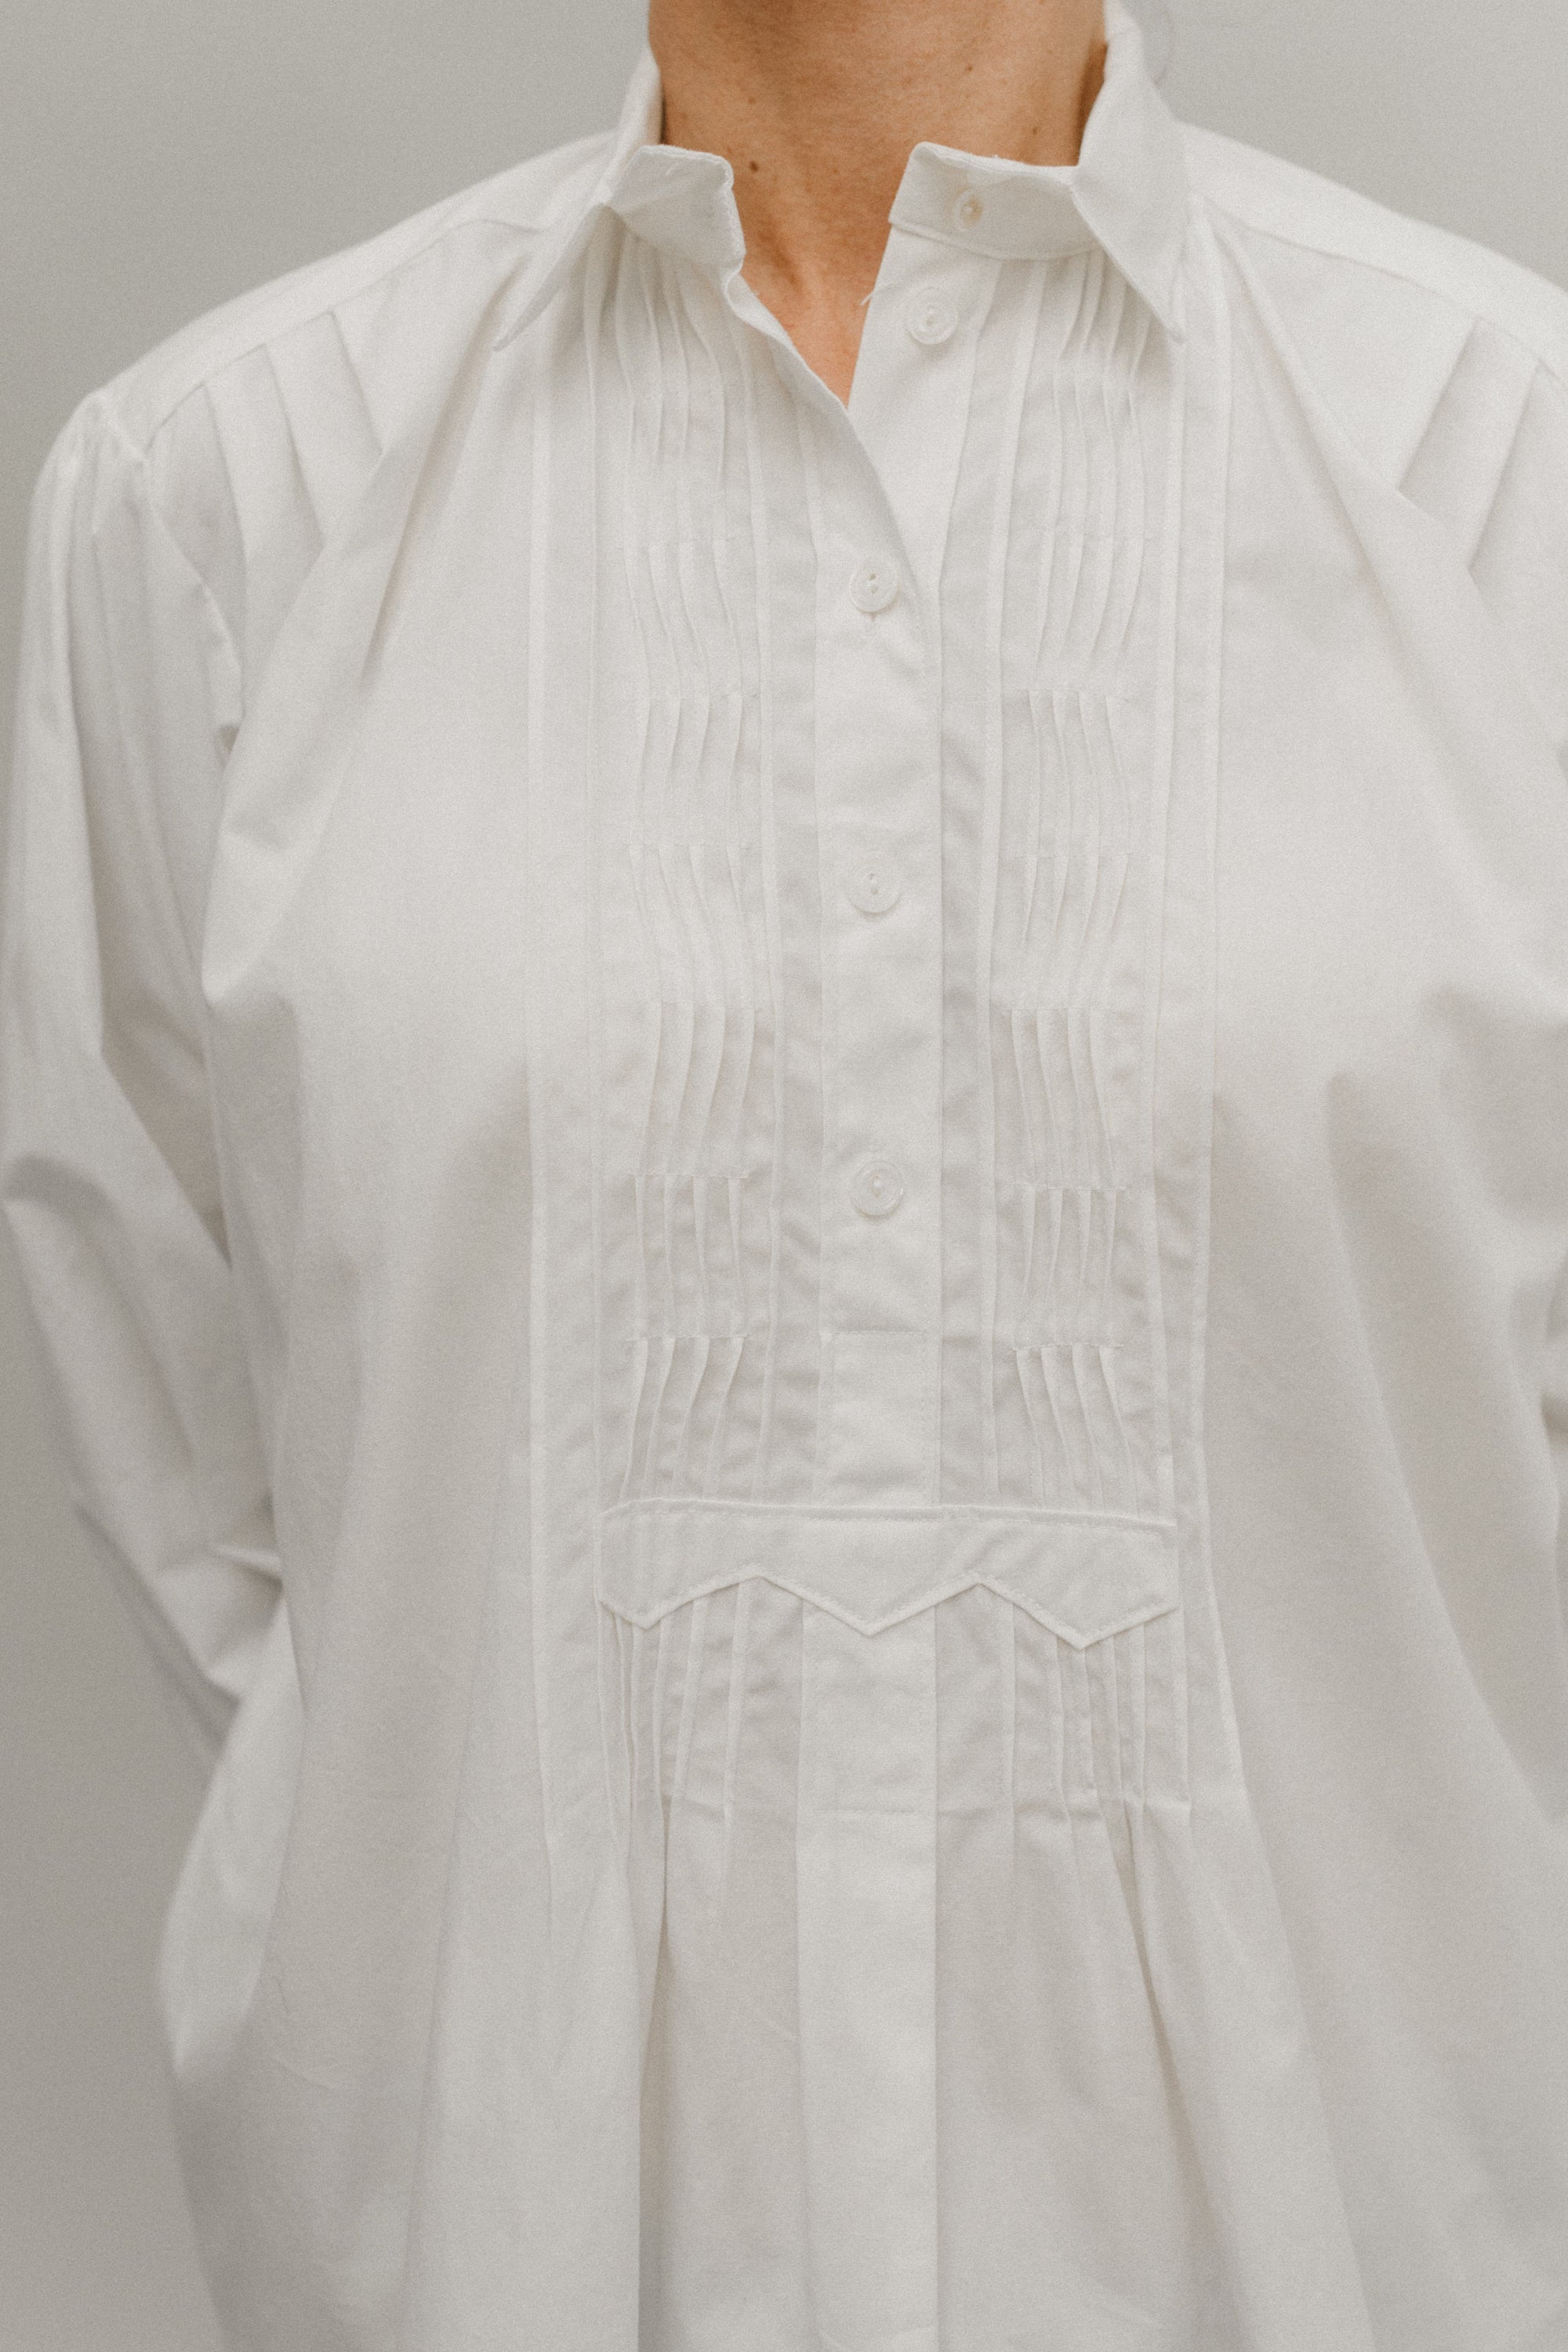 Close up of Croatian Shirt showing the front tucks and pleats.